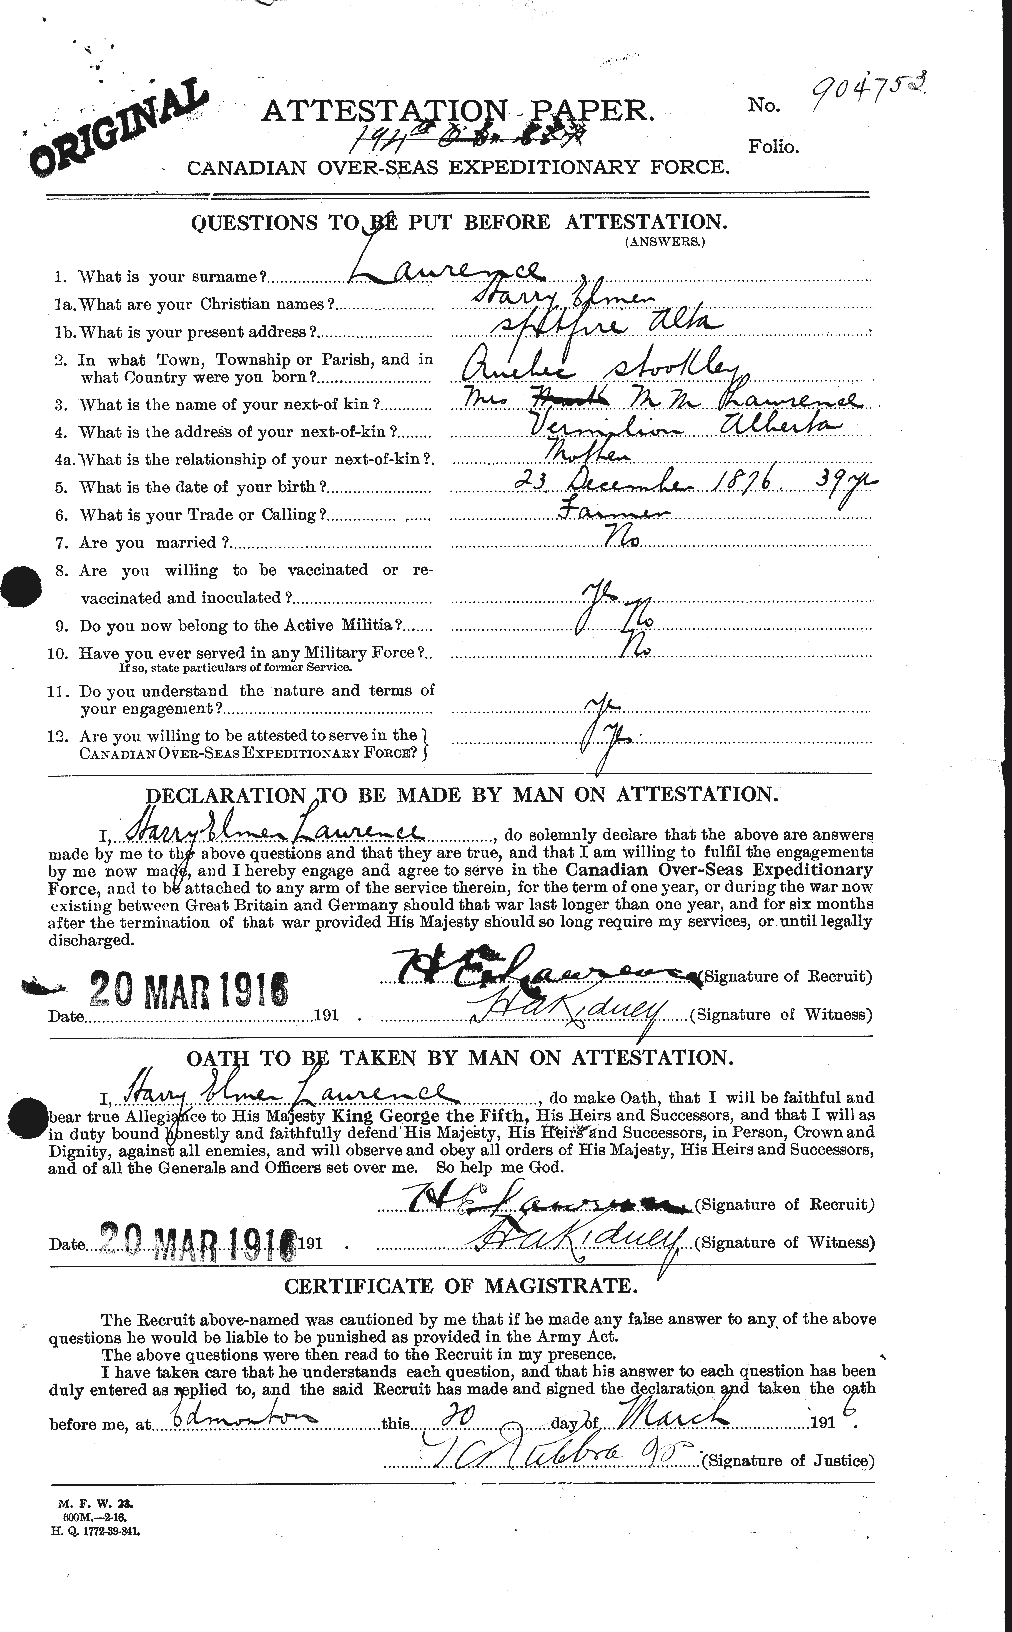 Personnel Records of the First World War - CEF 452310a